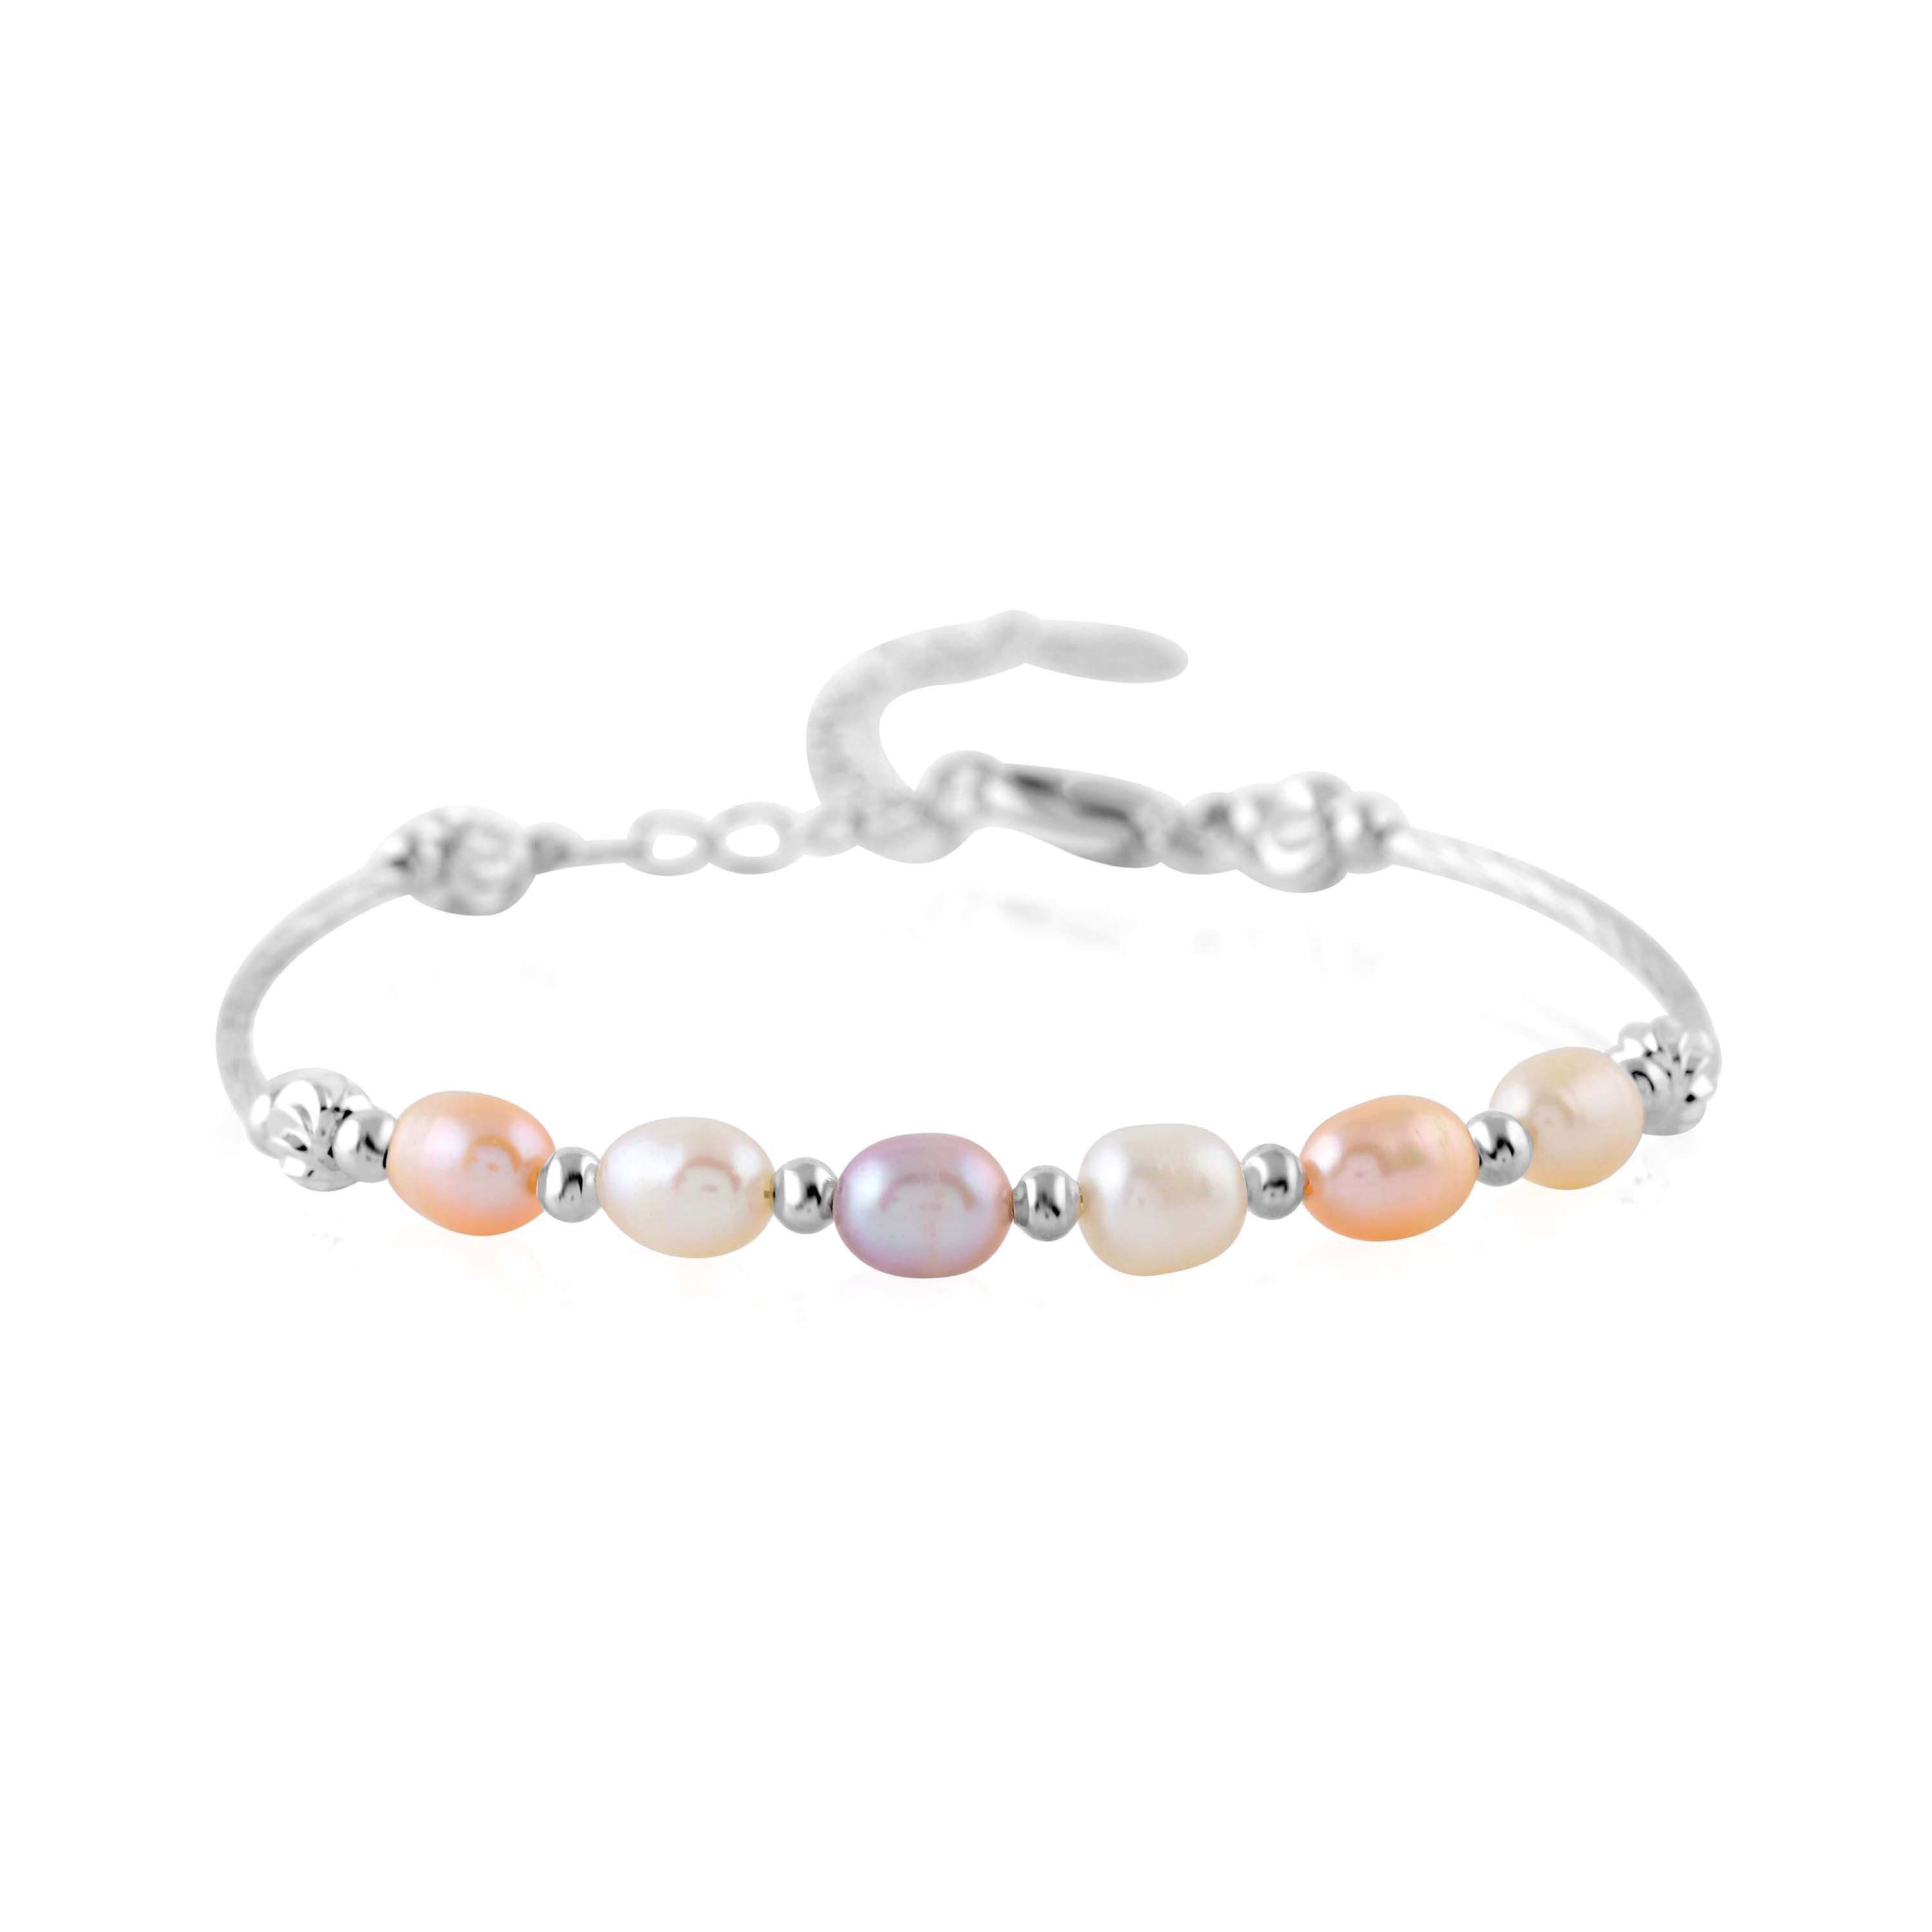 Charming Sterling Silver Bracelet With Pink Pearls